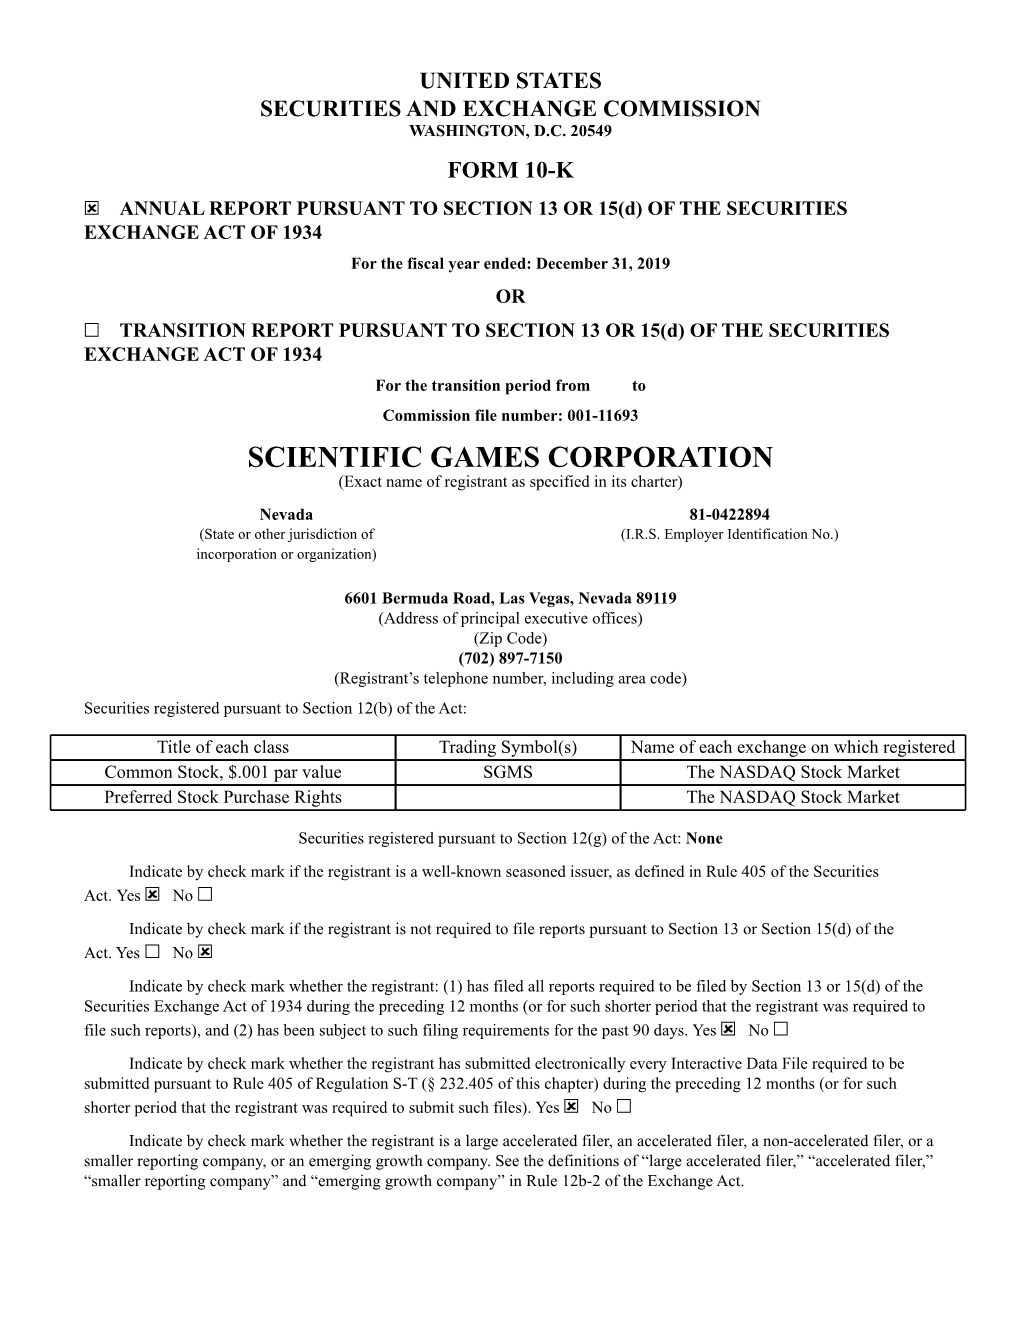 SCIENTIFIC GAMES CORPORATION (Exact Name of Registrant As Specified in Its Charter) Nevada 81-0422894 (State Or Other Jurisdiction of (I.R.S